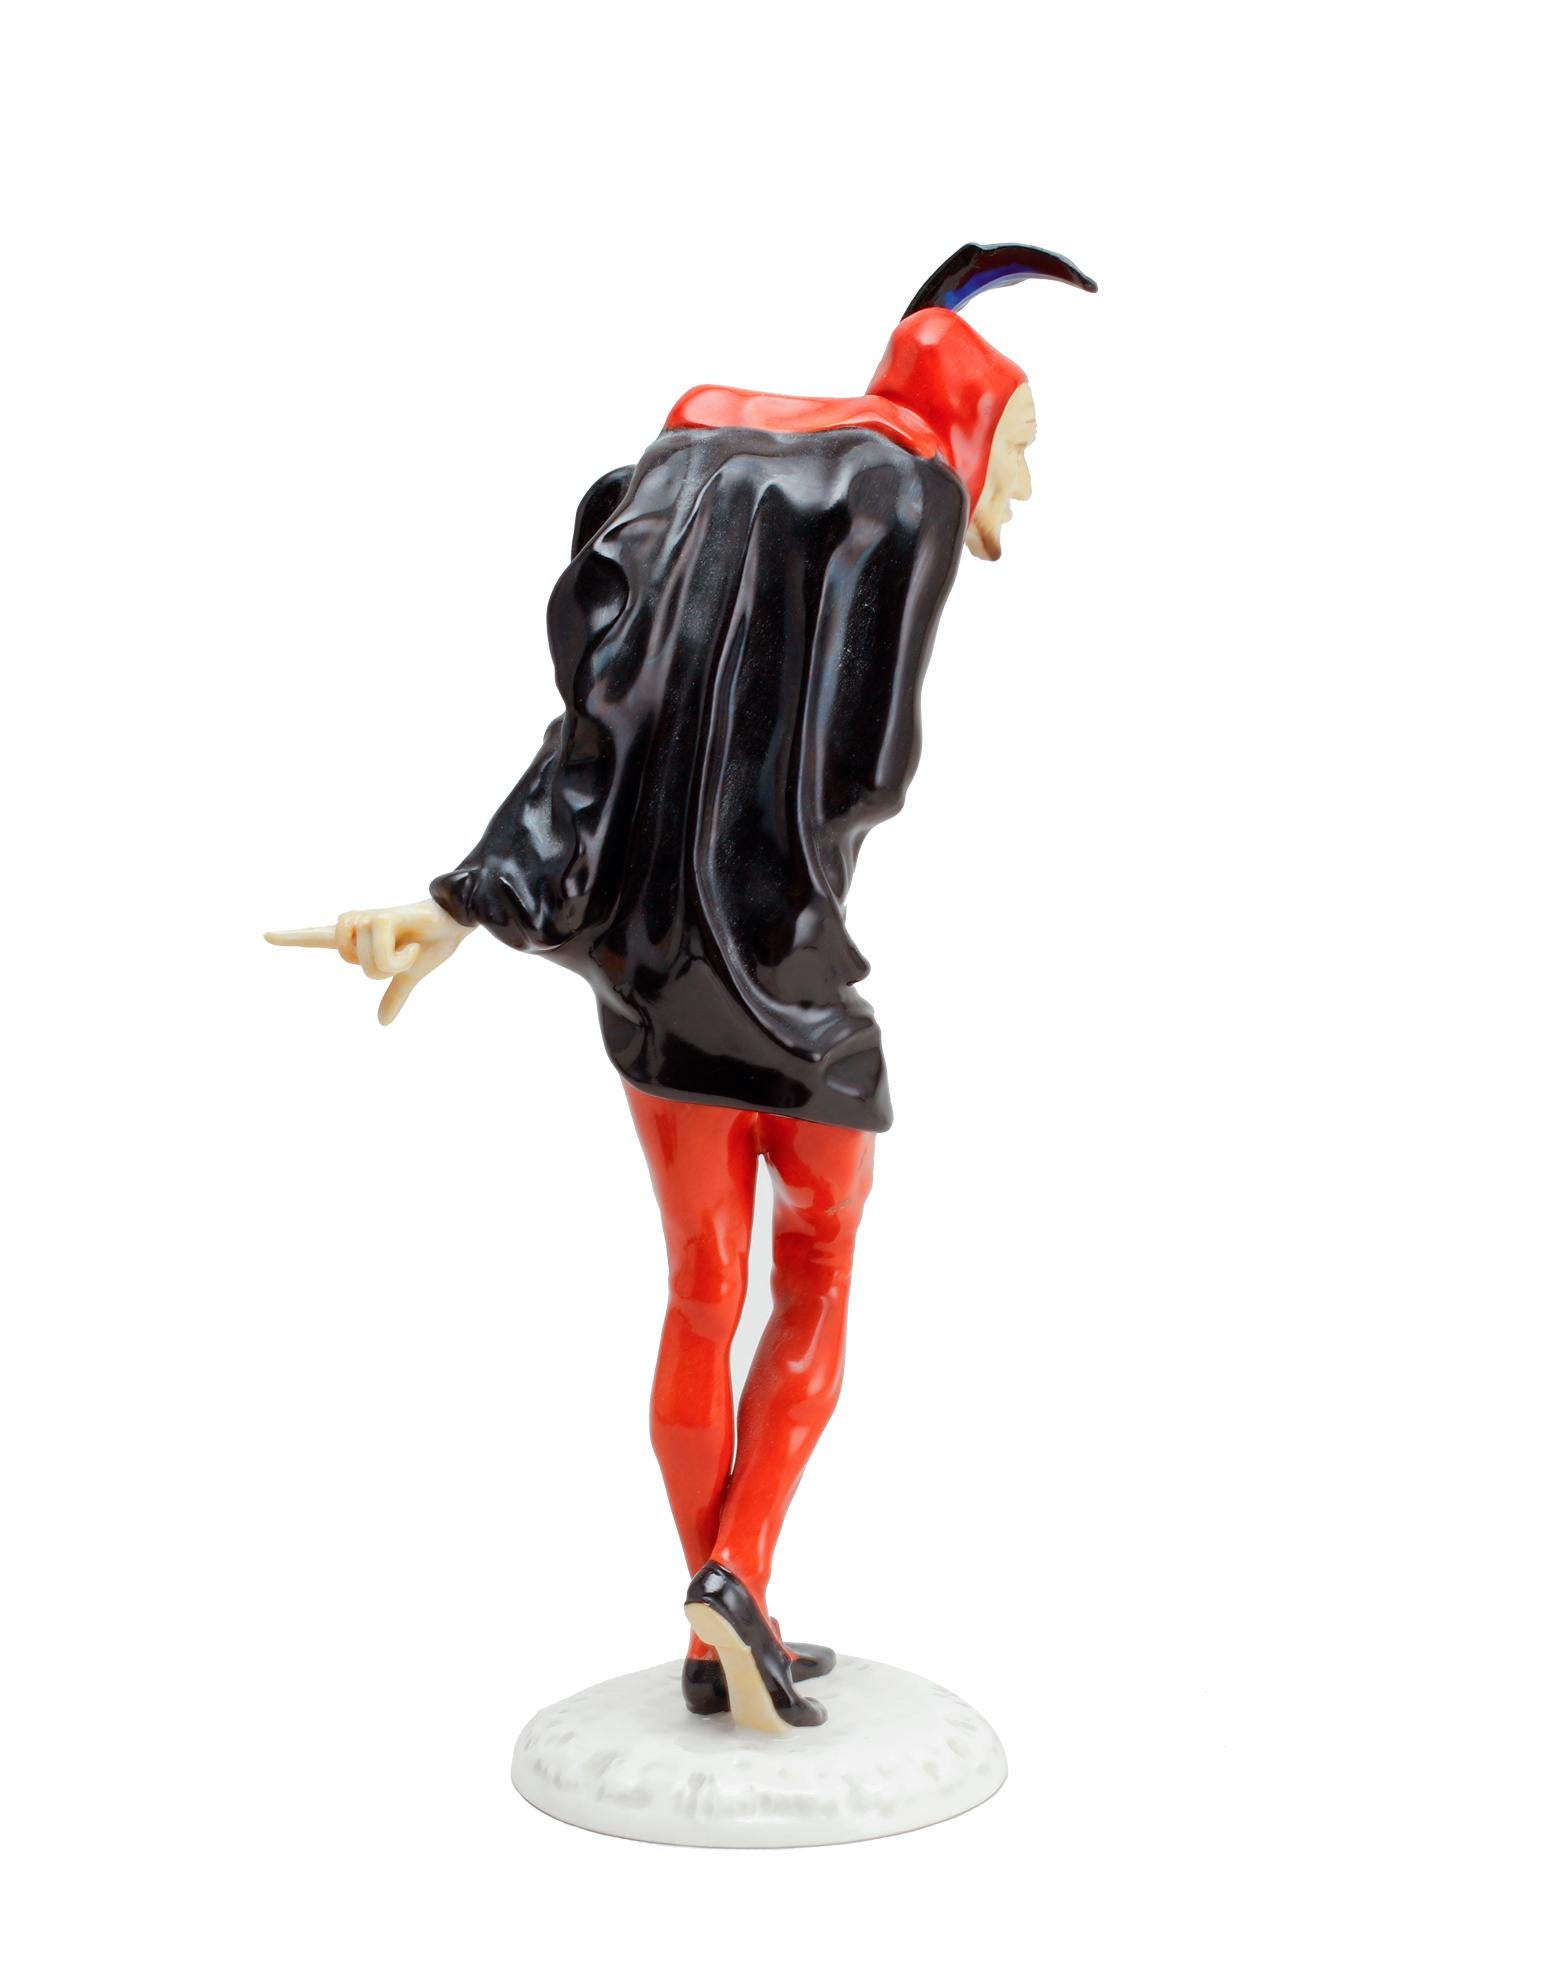 Mephisto (Faust) as flamboyant figurine, designed by Karl Tutter (1883-1969), for Hutchenreuter, Selb Bavaria. Mephisto is an entity in the Abrahamic religions that seduces humans into sin or falsehood. The devil is a symbol of virtuous